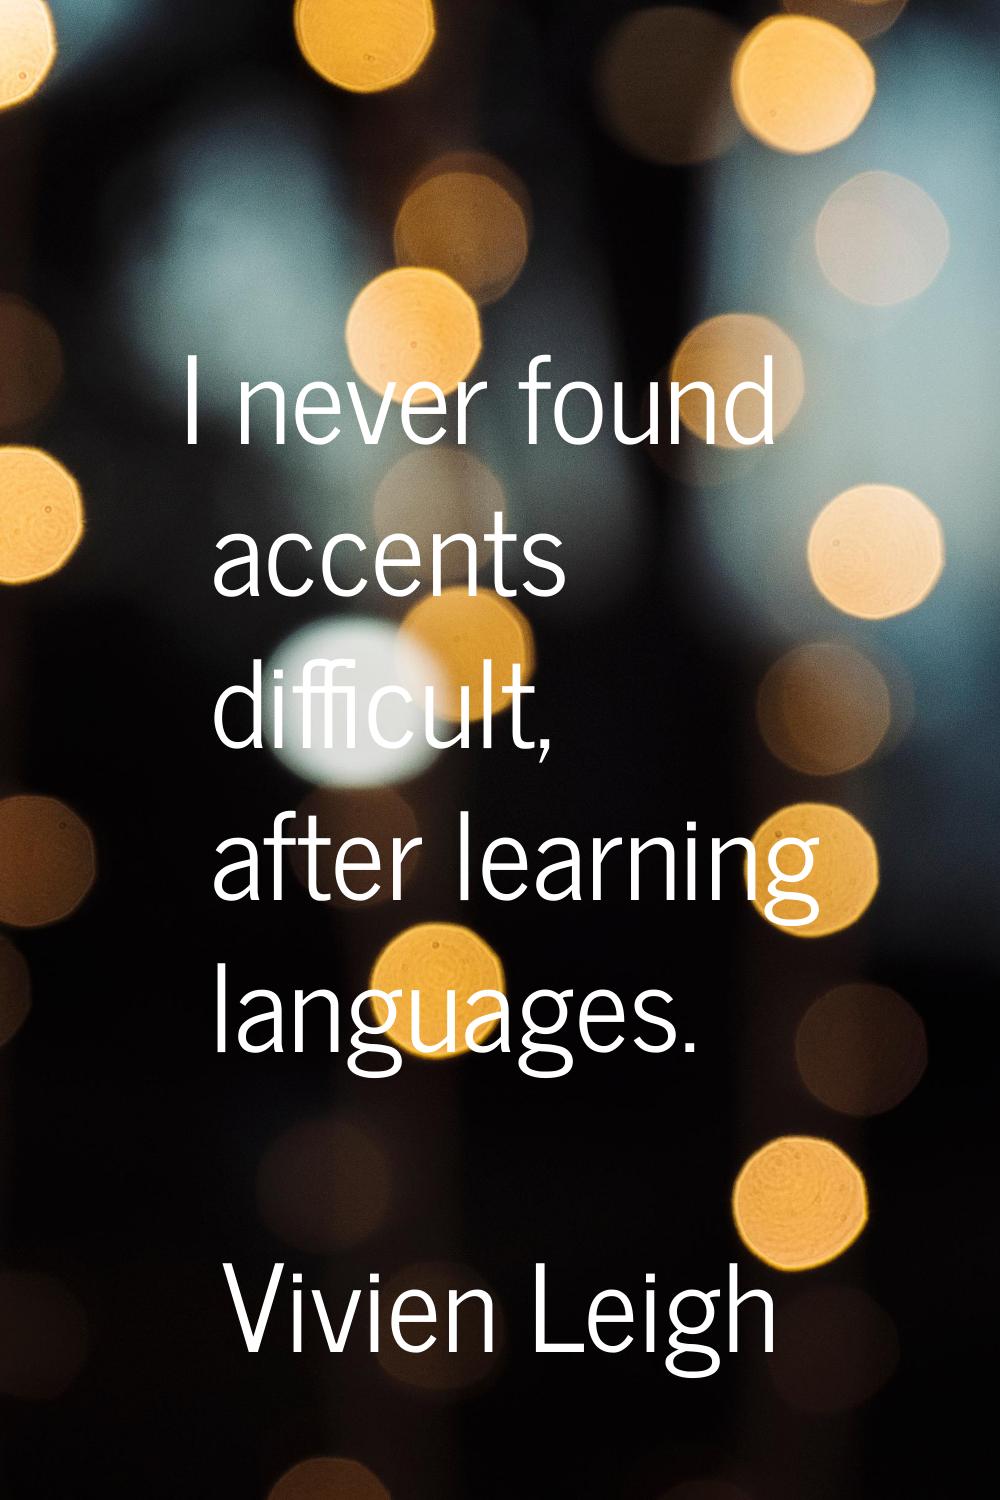 I never found accents difficult, after learning languages.